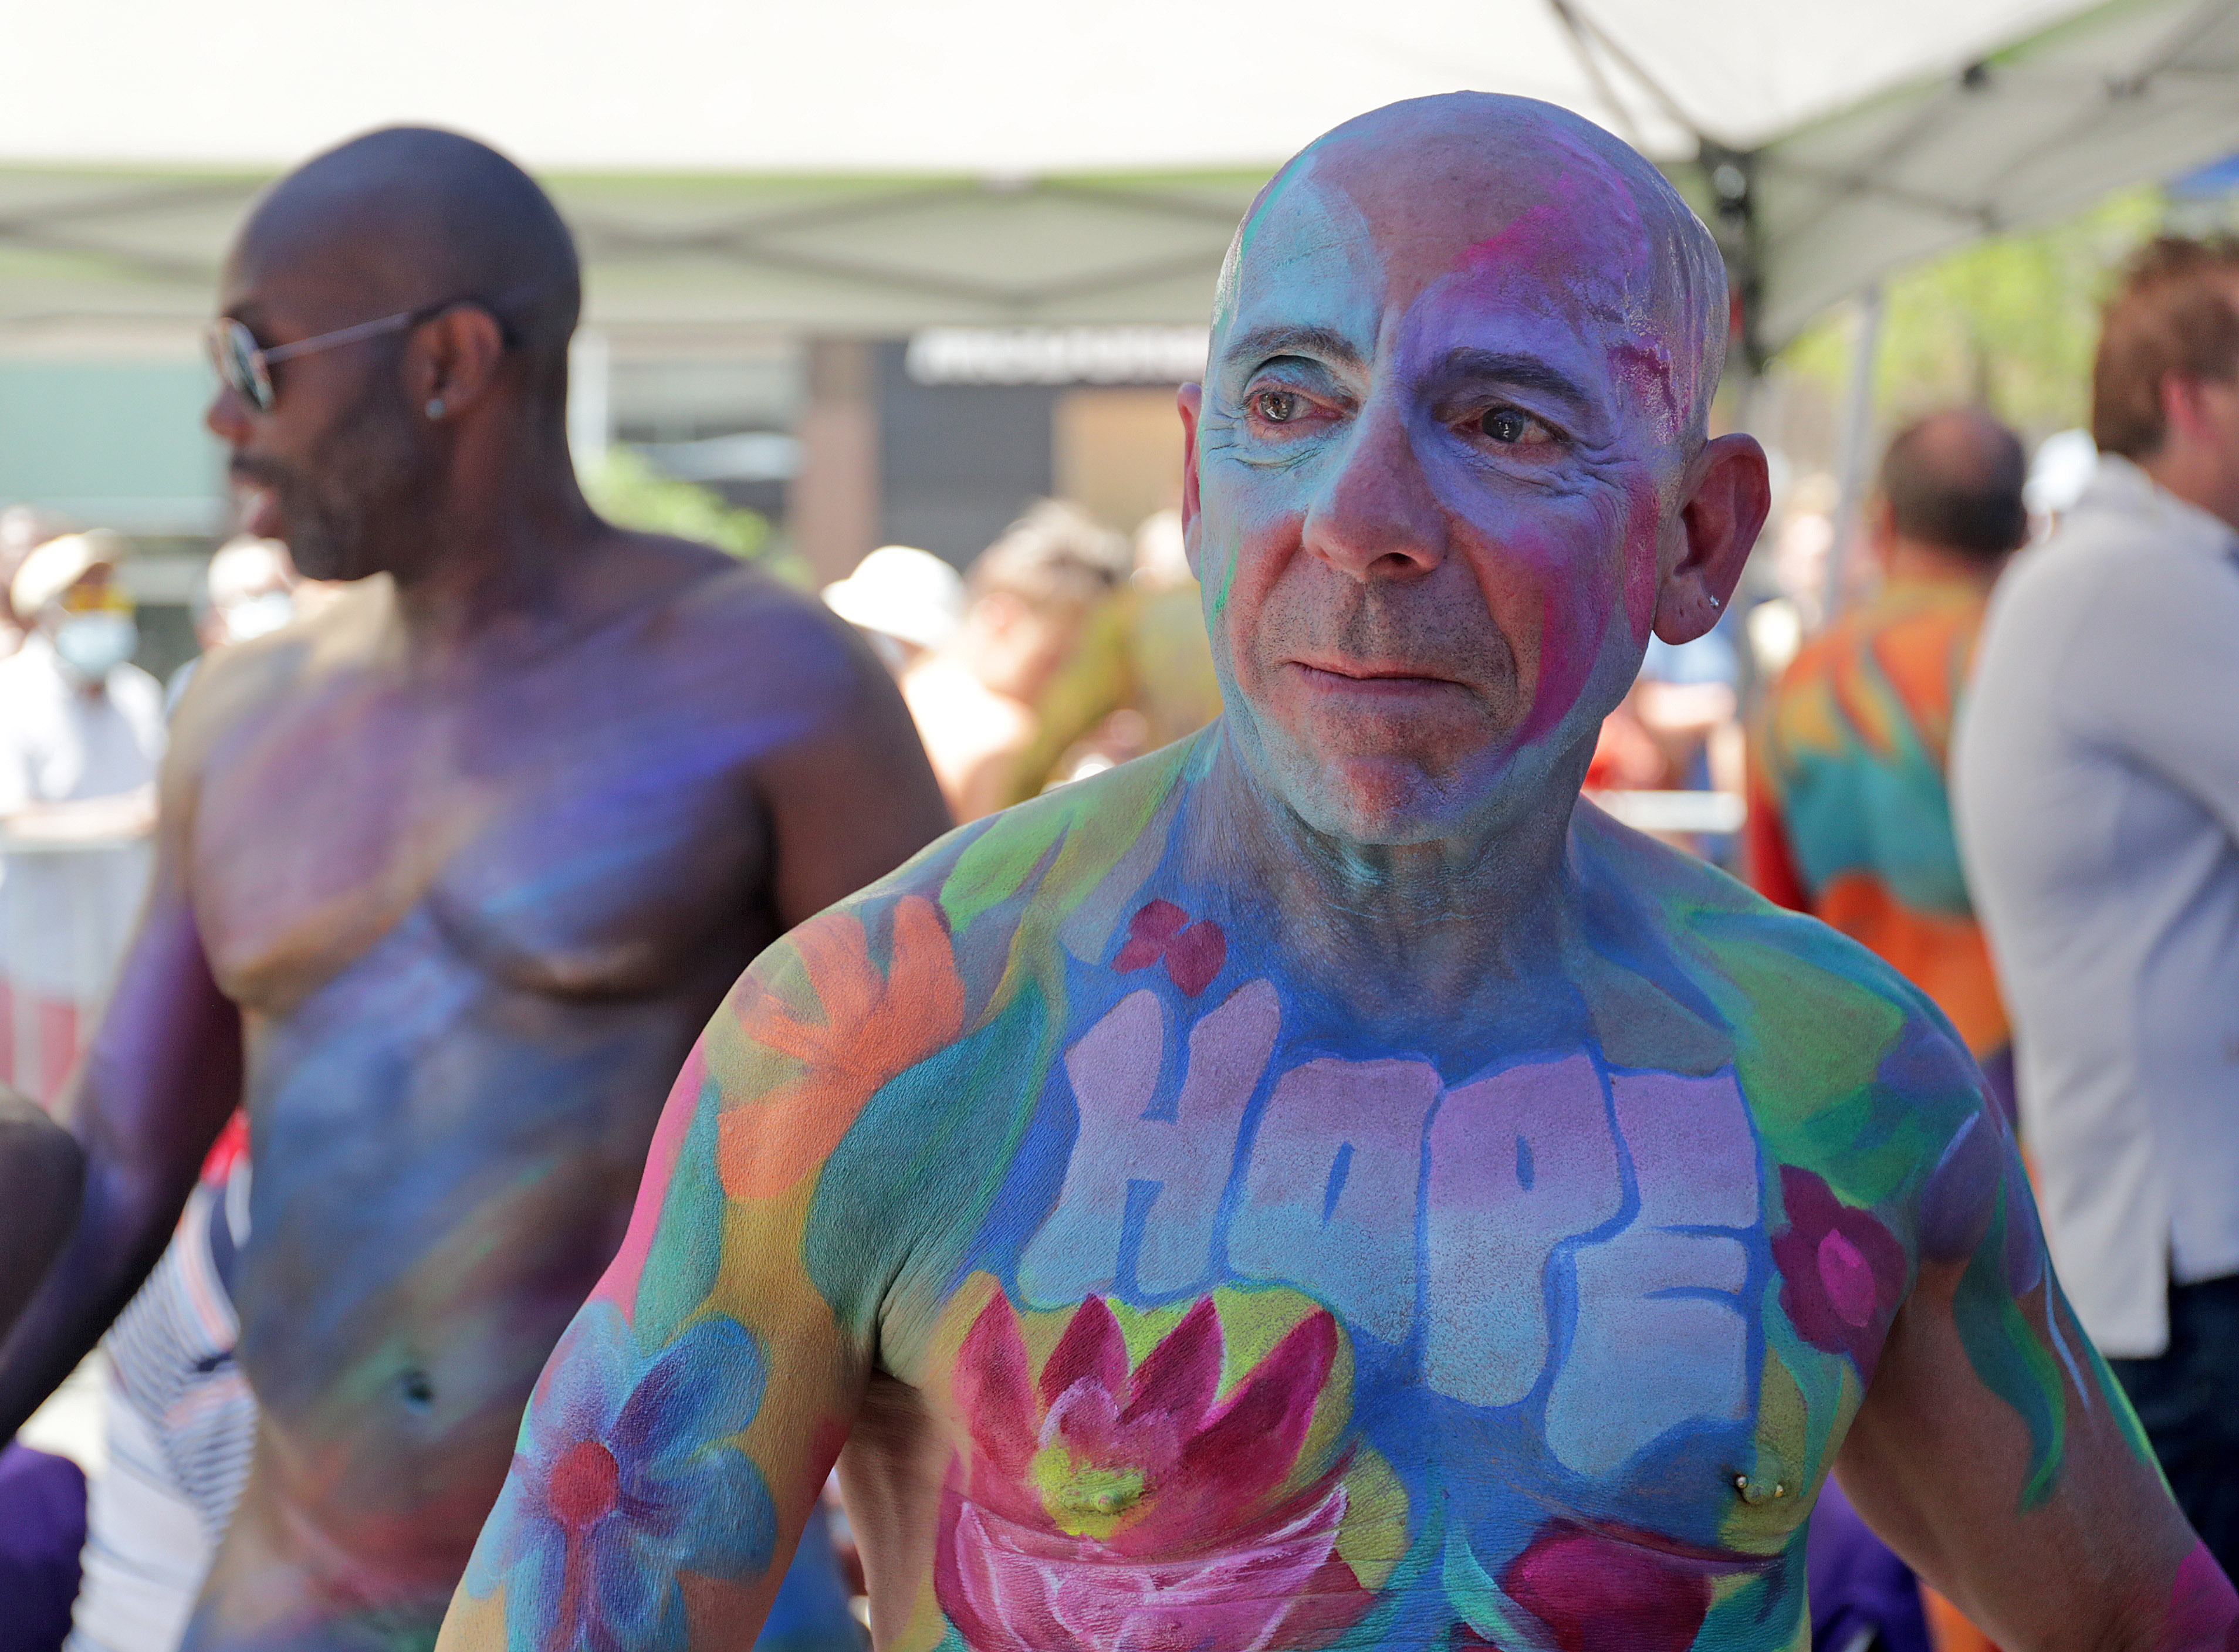 NYC Naked Bodypainting Day 2022